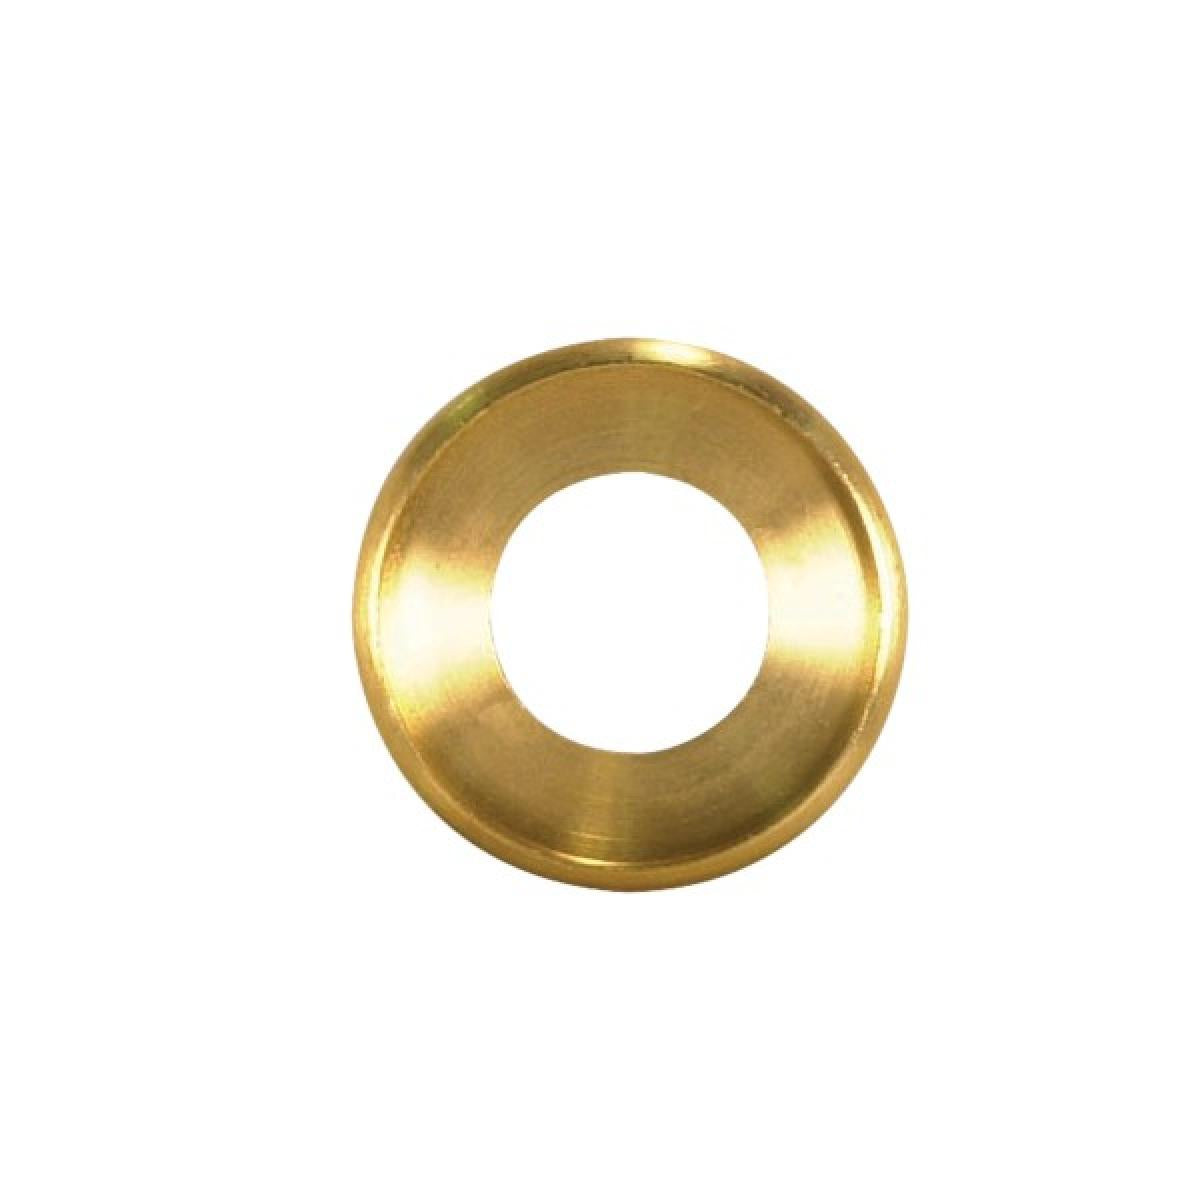 Satco 90-1615 Turned Brass Check Ring 1/4 IP Slip Unfinished 1-3/8" Diameter